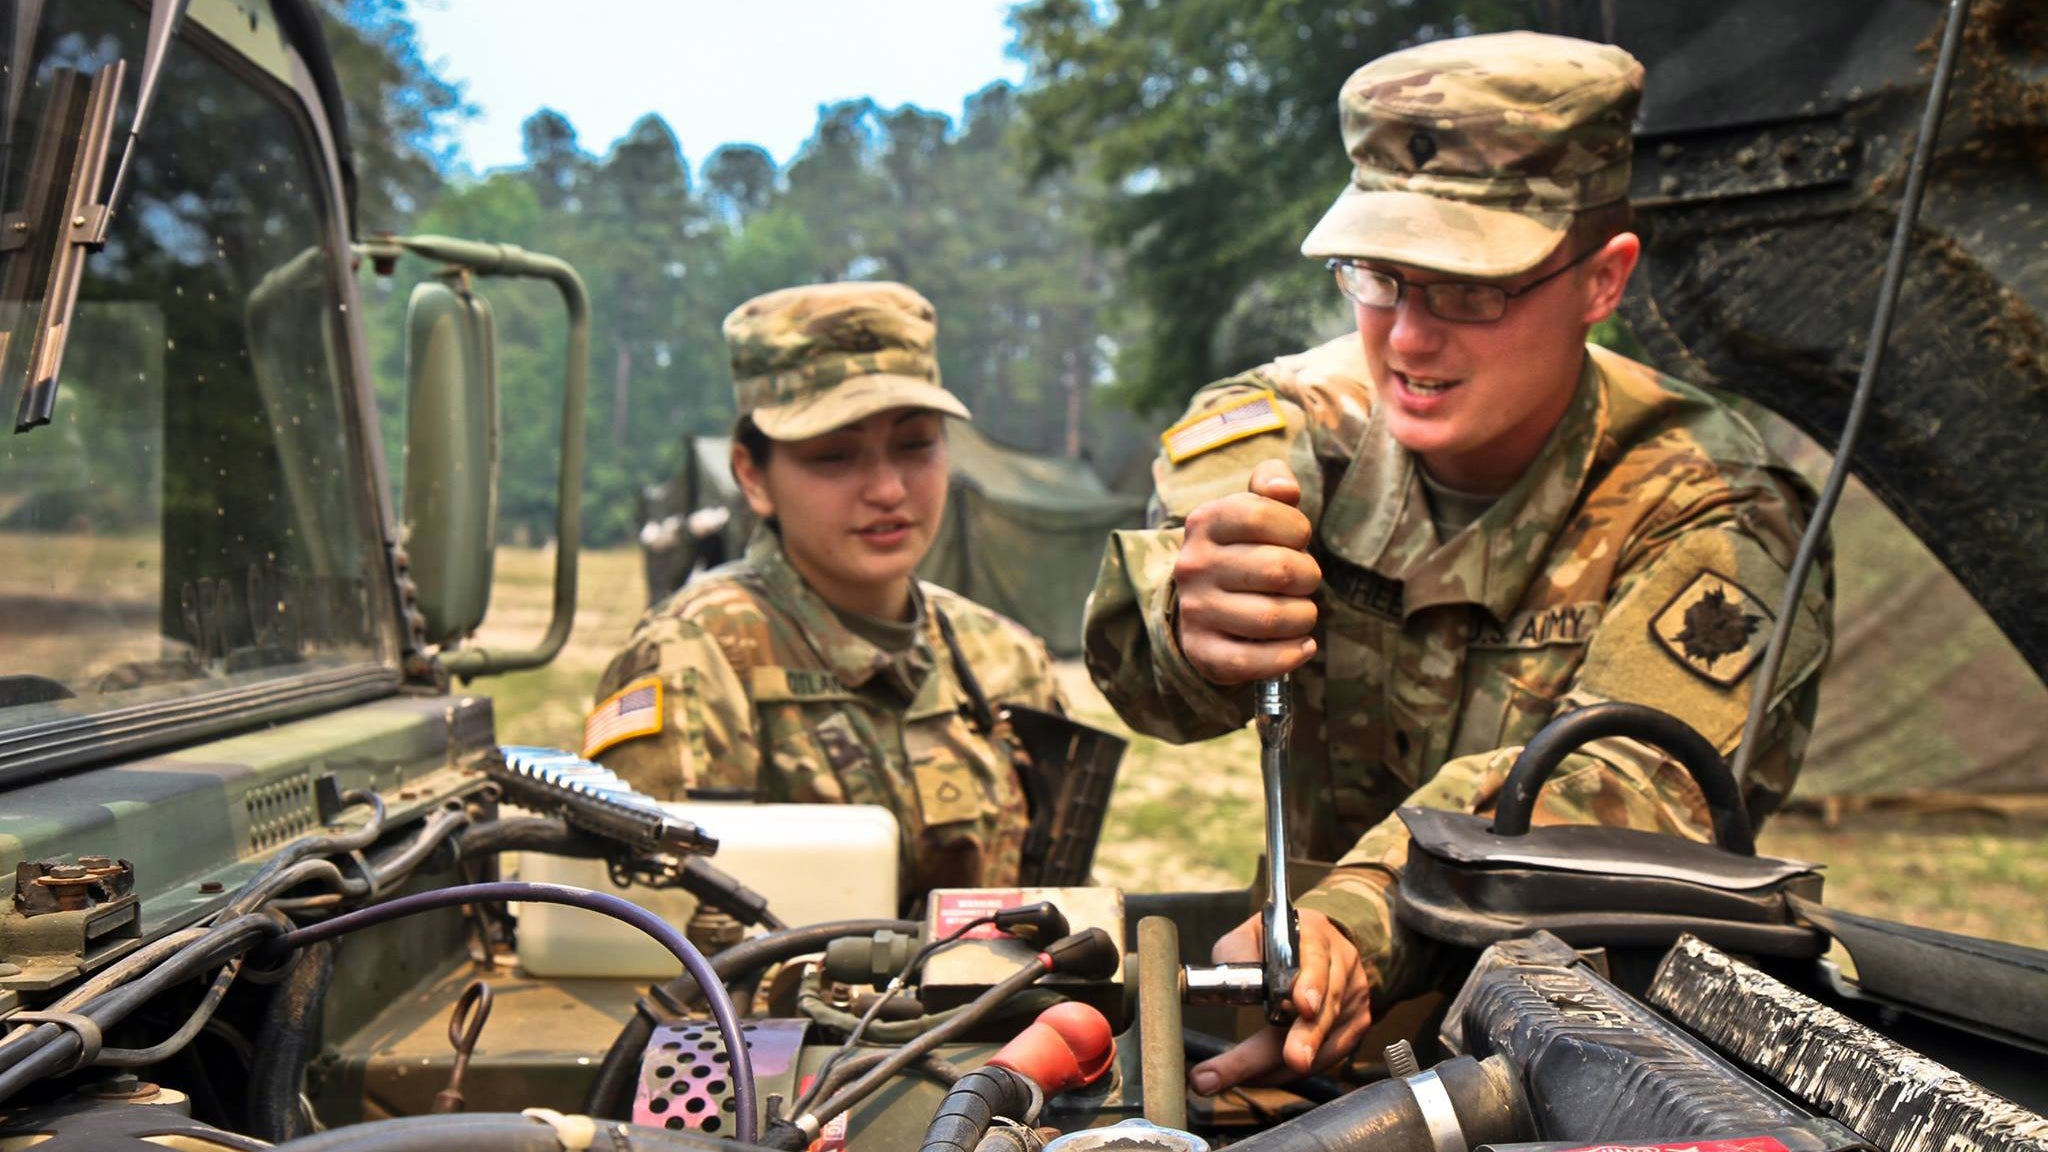 Soldiers maintaining equipment